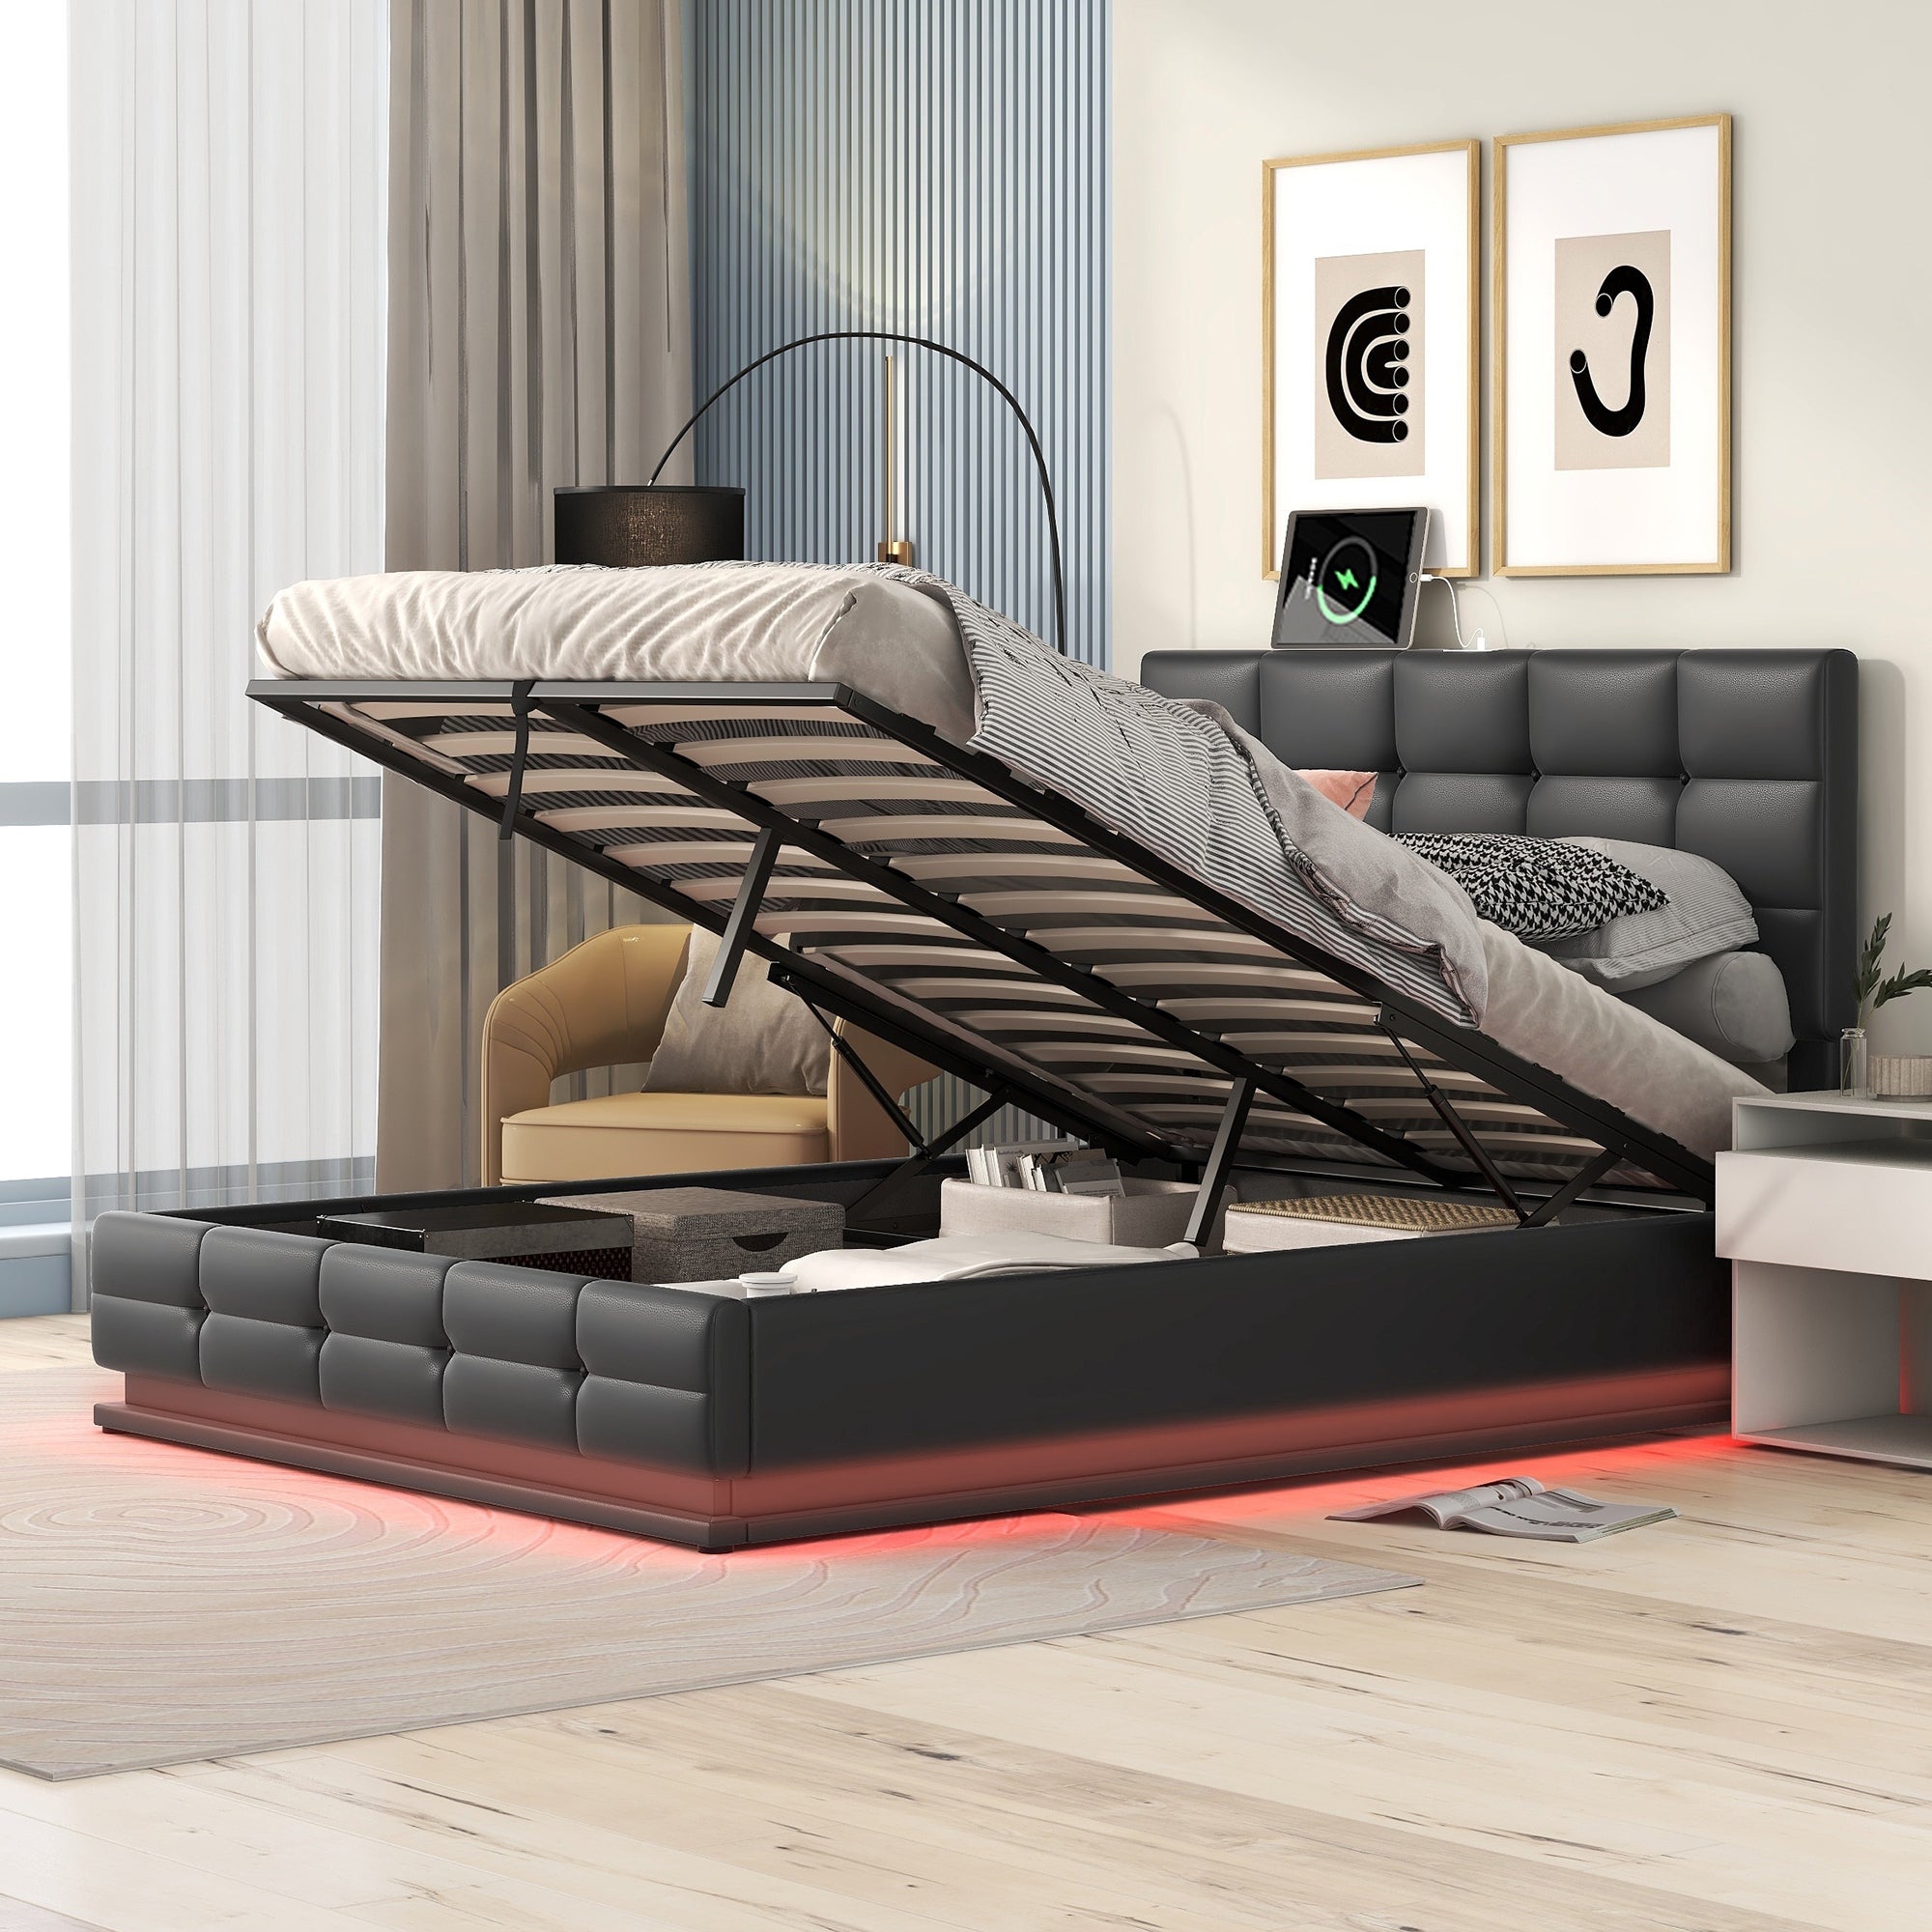 Kosmo Full Size Hydraulic Lift Storage Platform Bed with LED Lights and USB Charger Upholstered with black Faux Leather